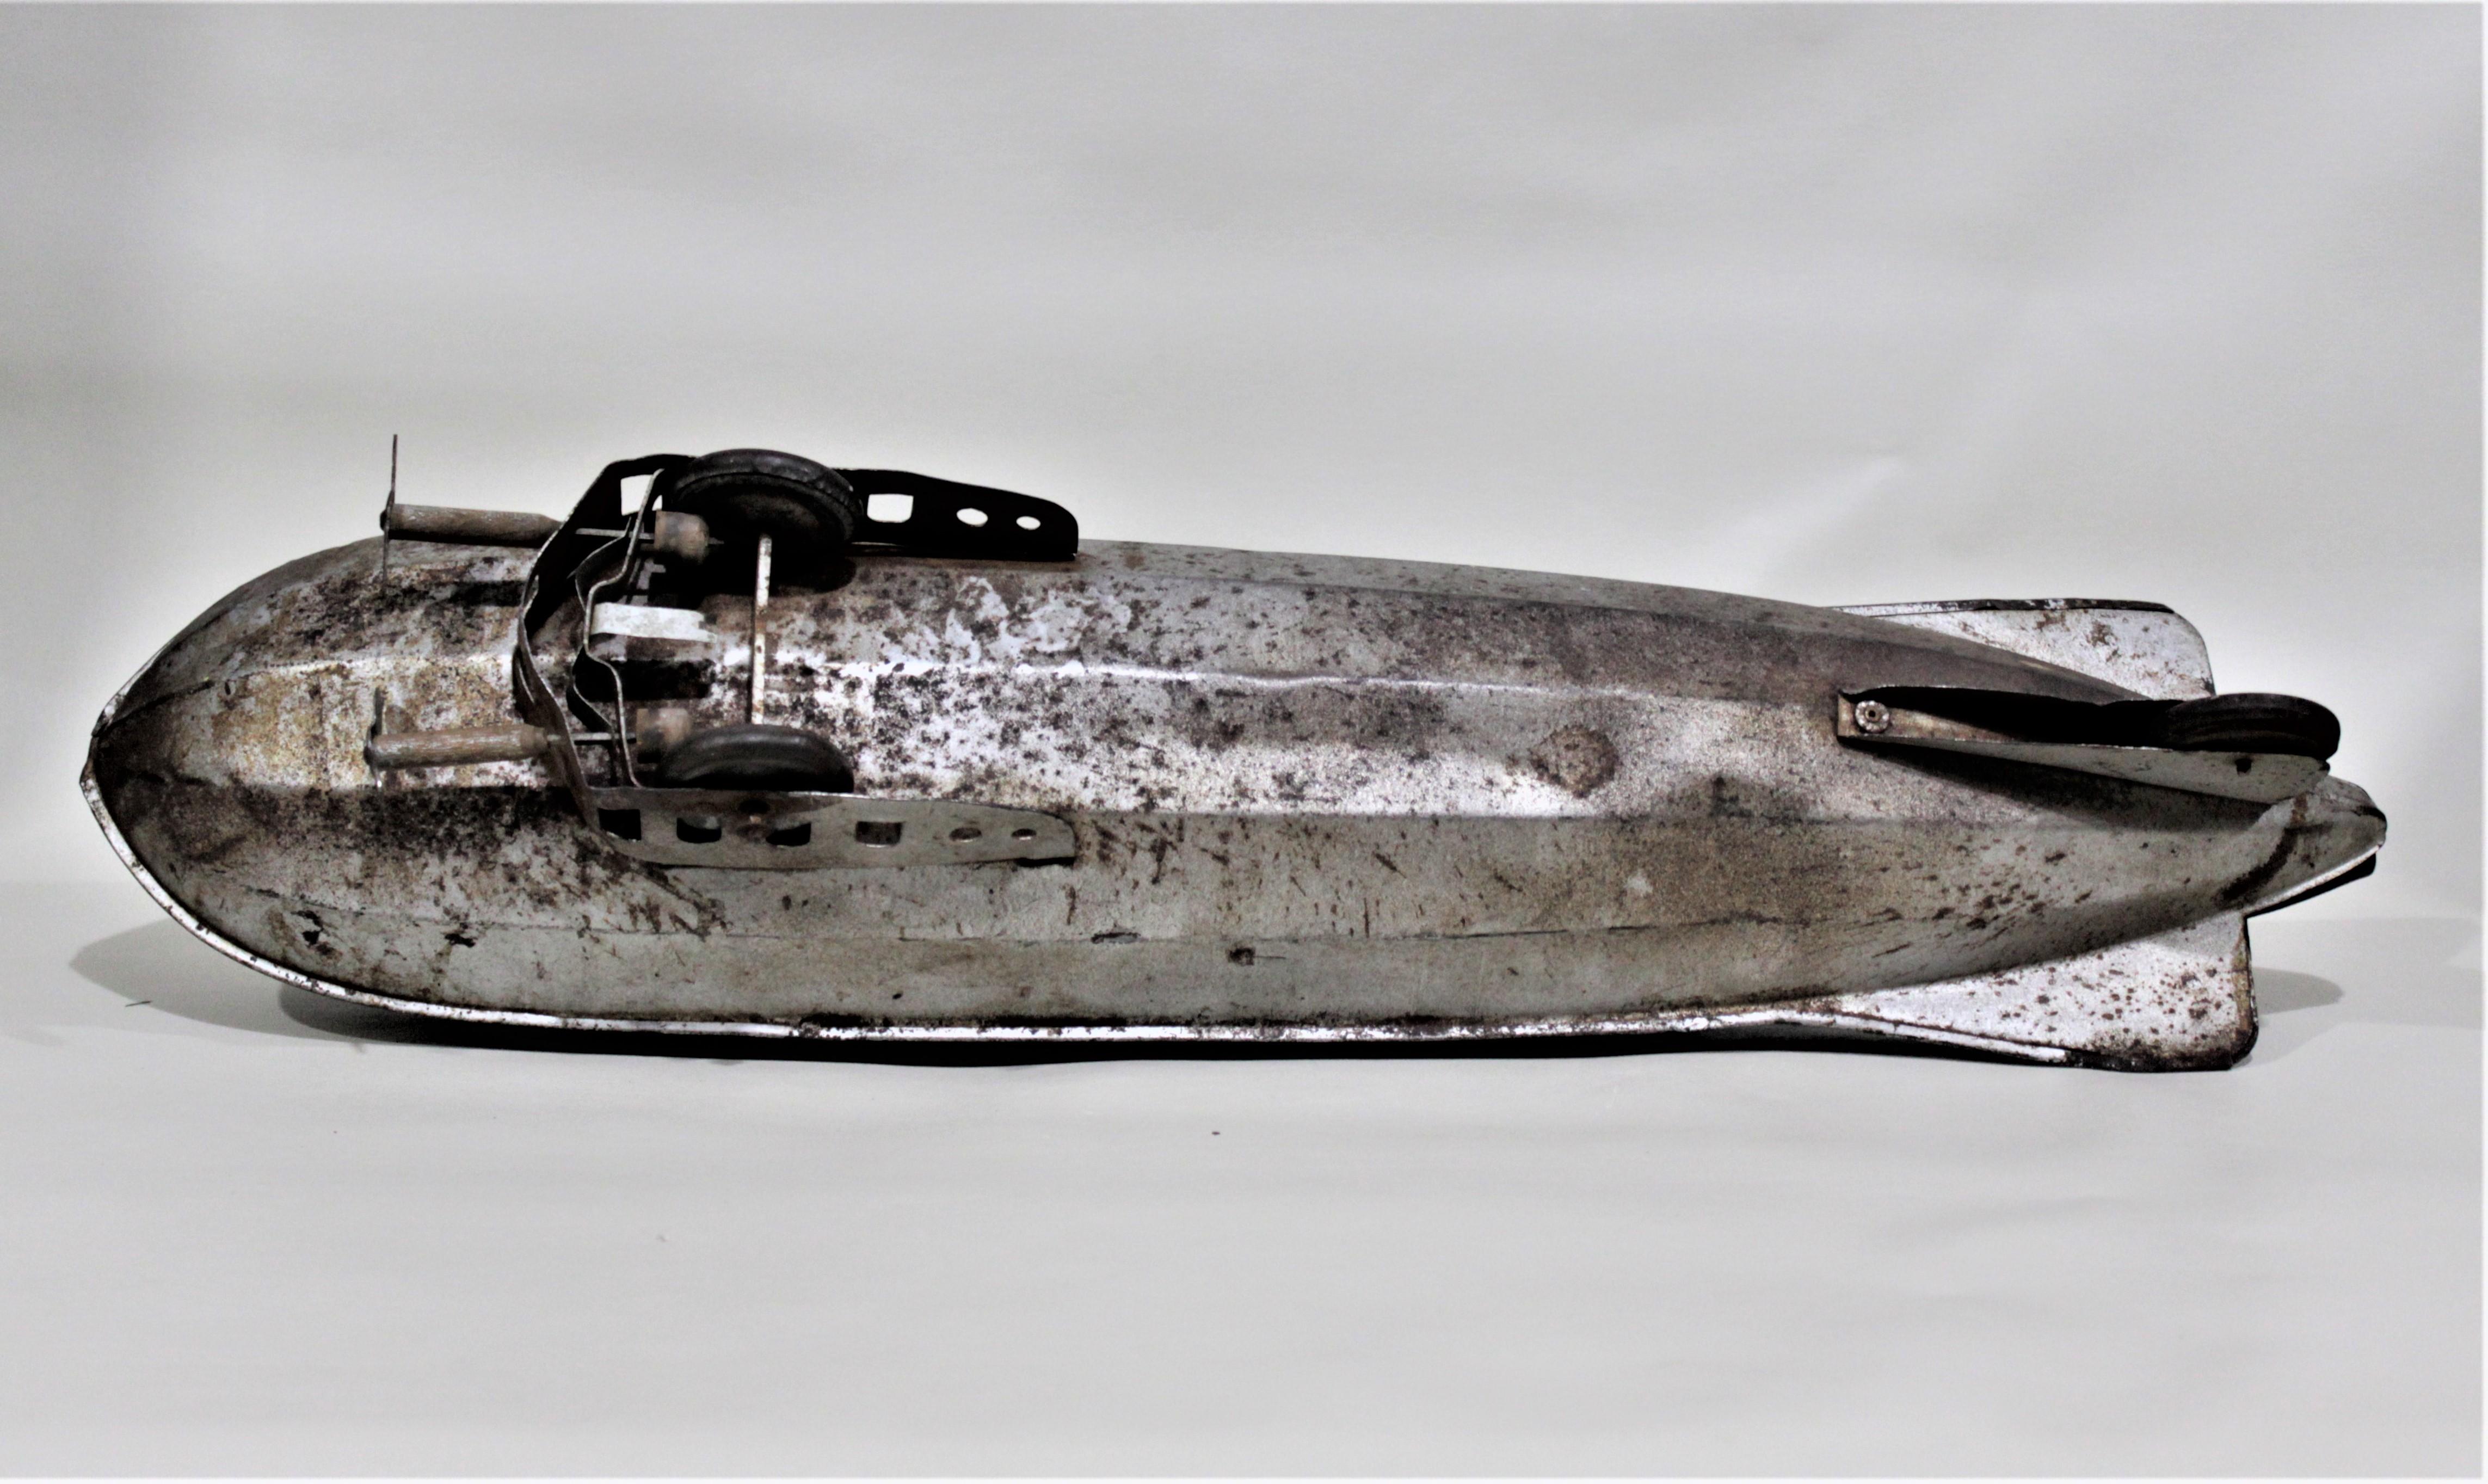 American Art Deco Steelcraft Metal Pull Toy, the 'Little Giant Zeppelin' For Sale